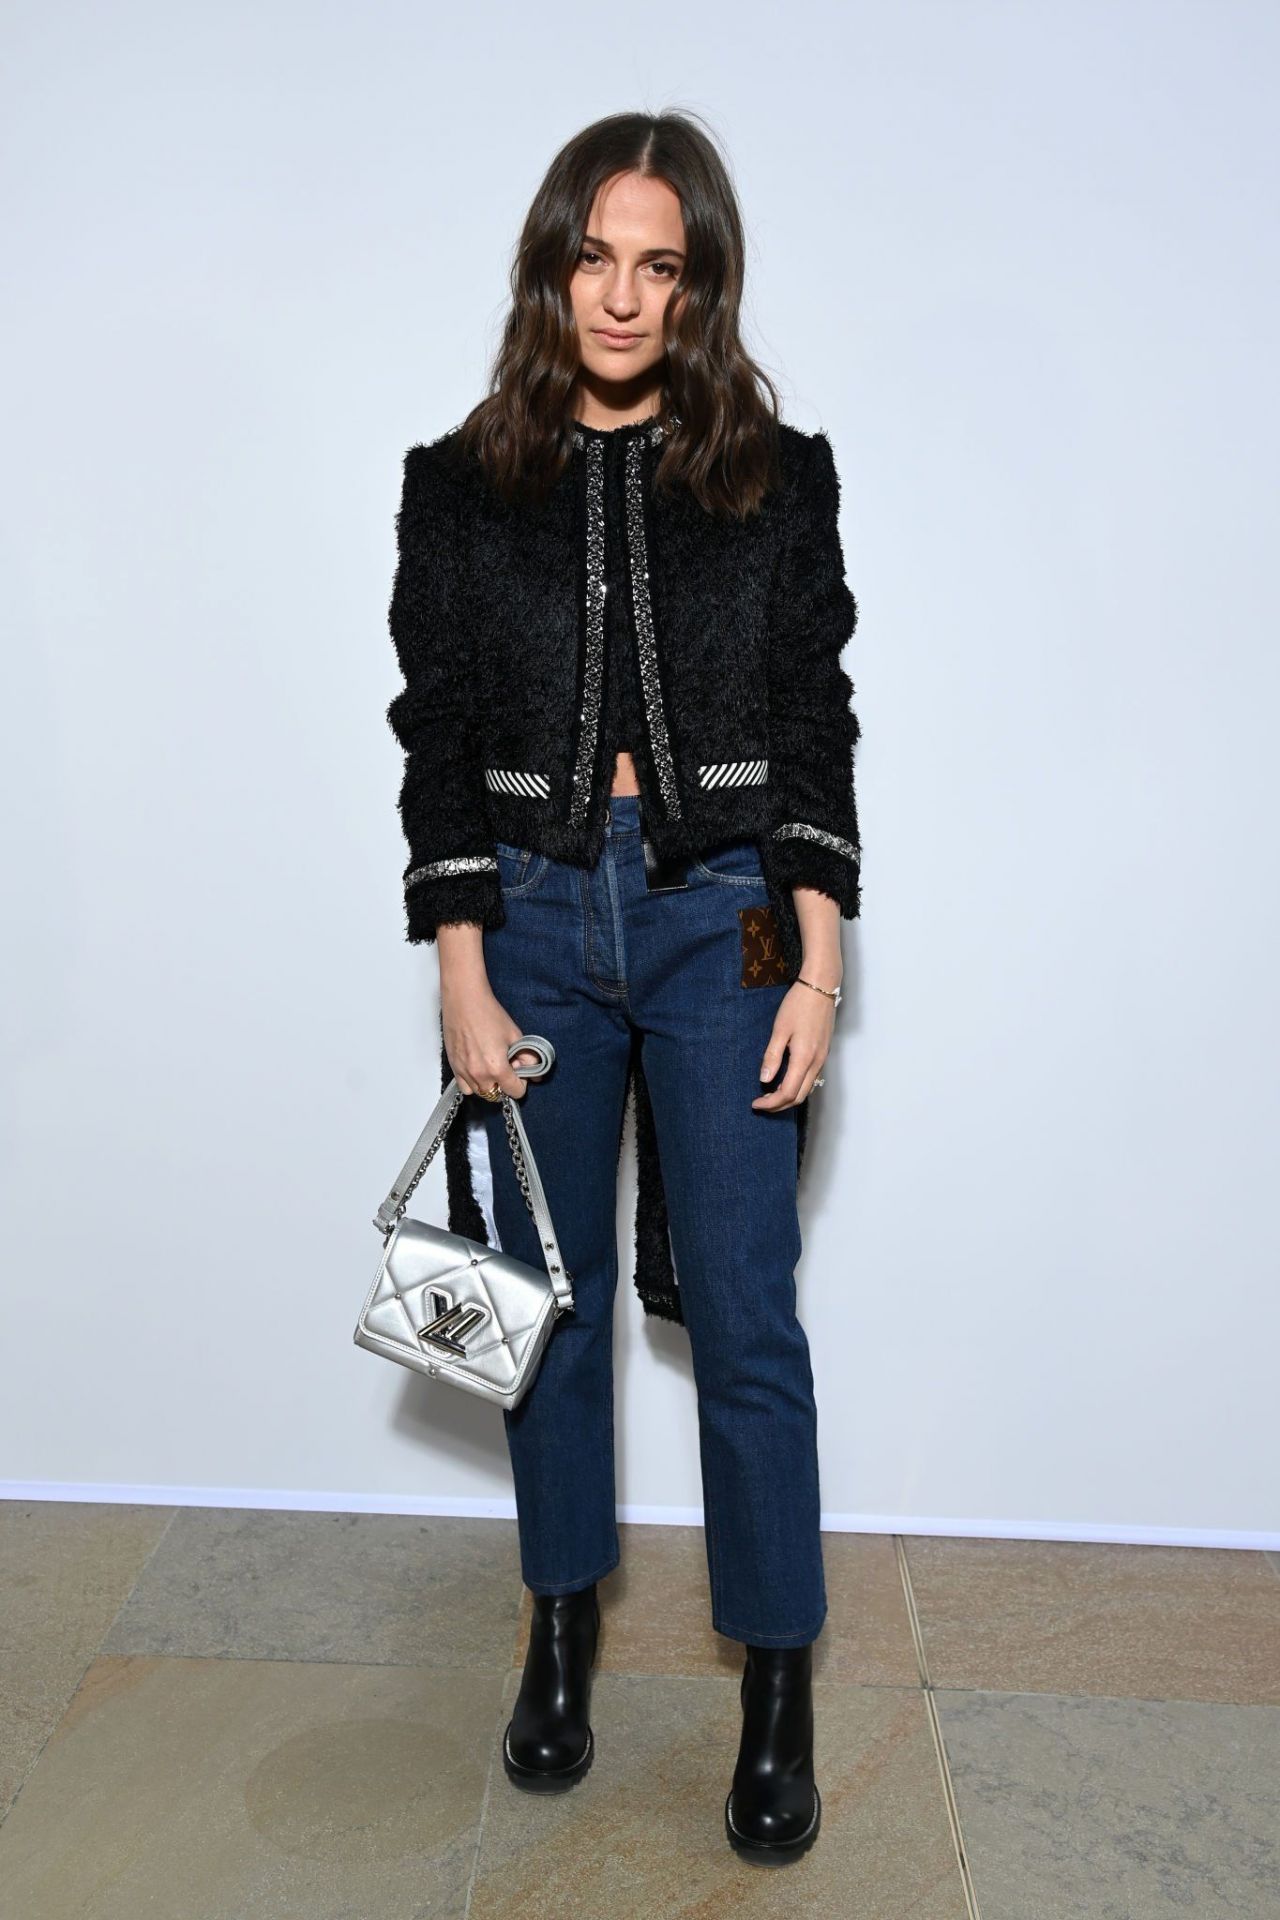 Alicia Vikander attending the Louis Vuitton show during PFW Womenswear  Fall/Winter 22/23 in Paris, France on March 7, 2022. Photo by Julien  Reynaud/APS-Medias/ABACAPRESS.COM Stock Photo - Alamy